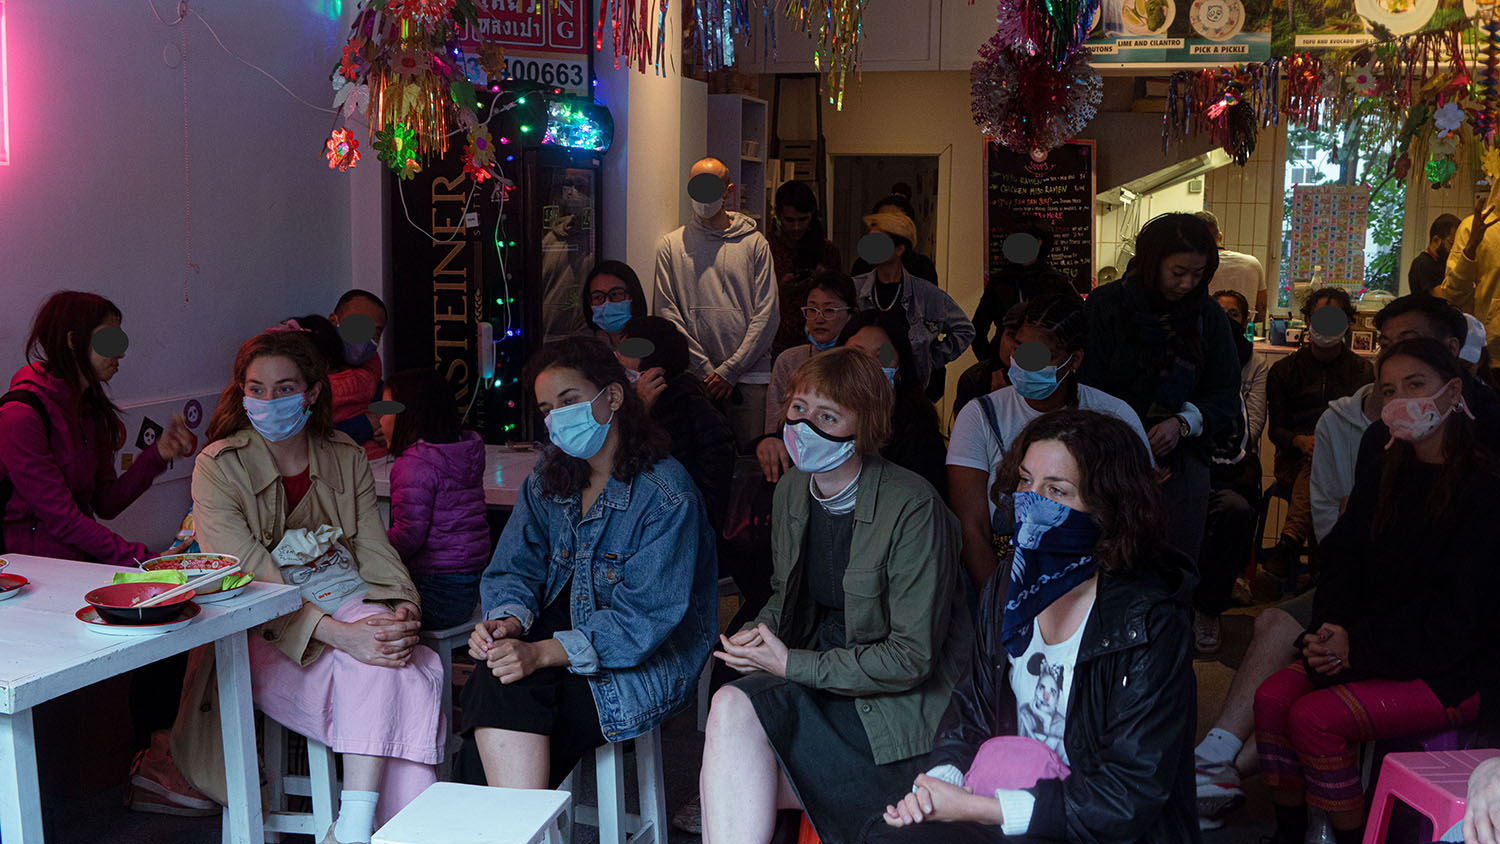 An audience, some people sitting on stools, some standing. Everyone is wearing a mask. The photo was taken during the #Mygration Event on 20.06.2020.